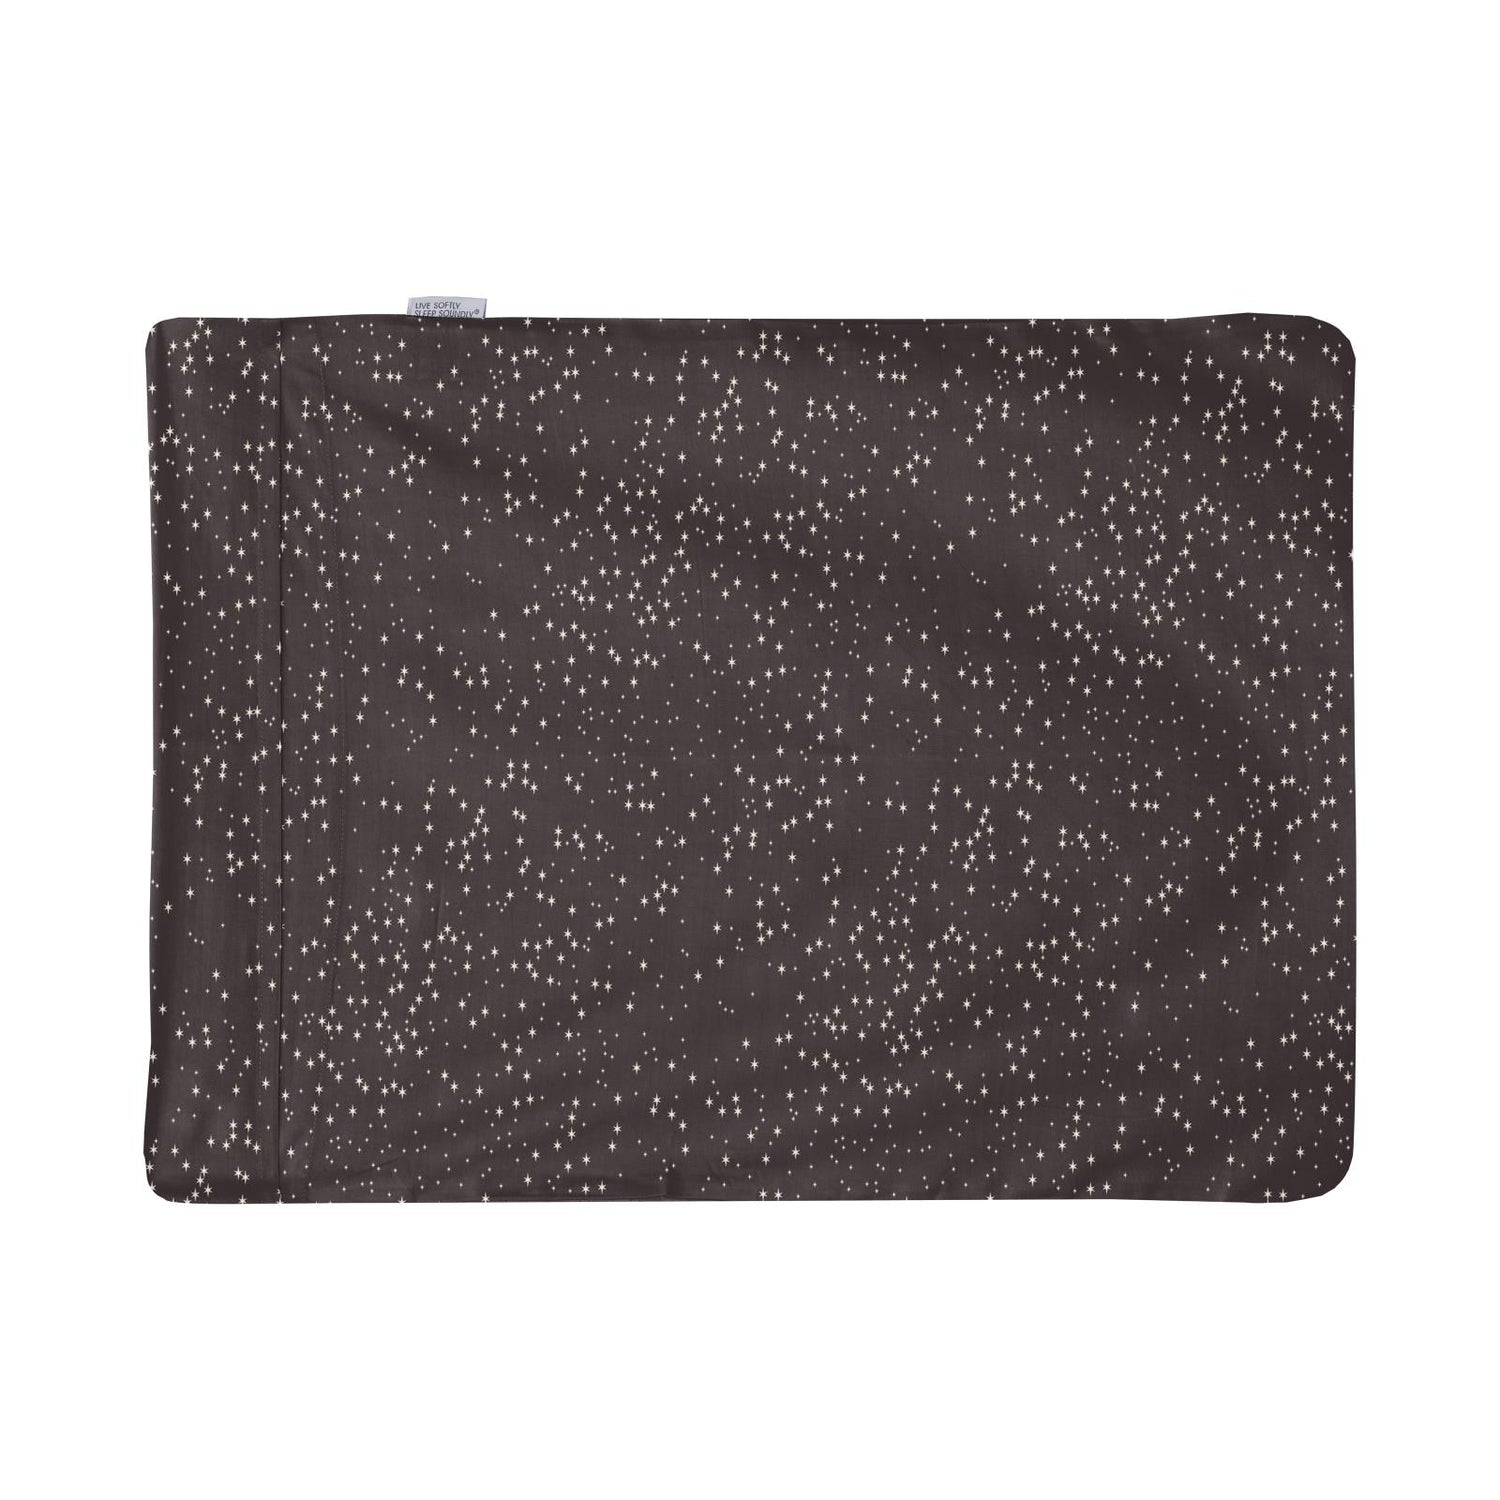 Print Woven Pillowcase in Midnight Constellations